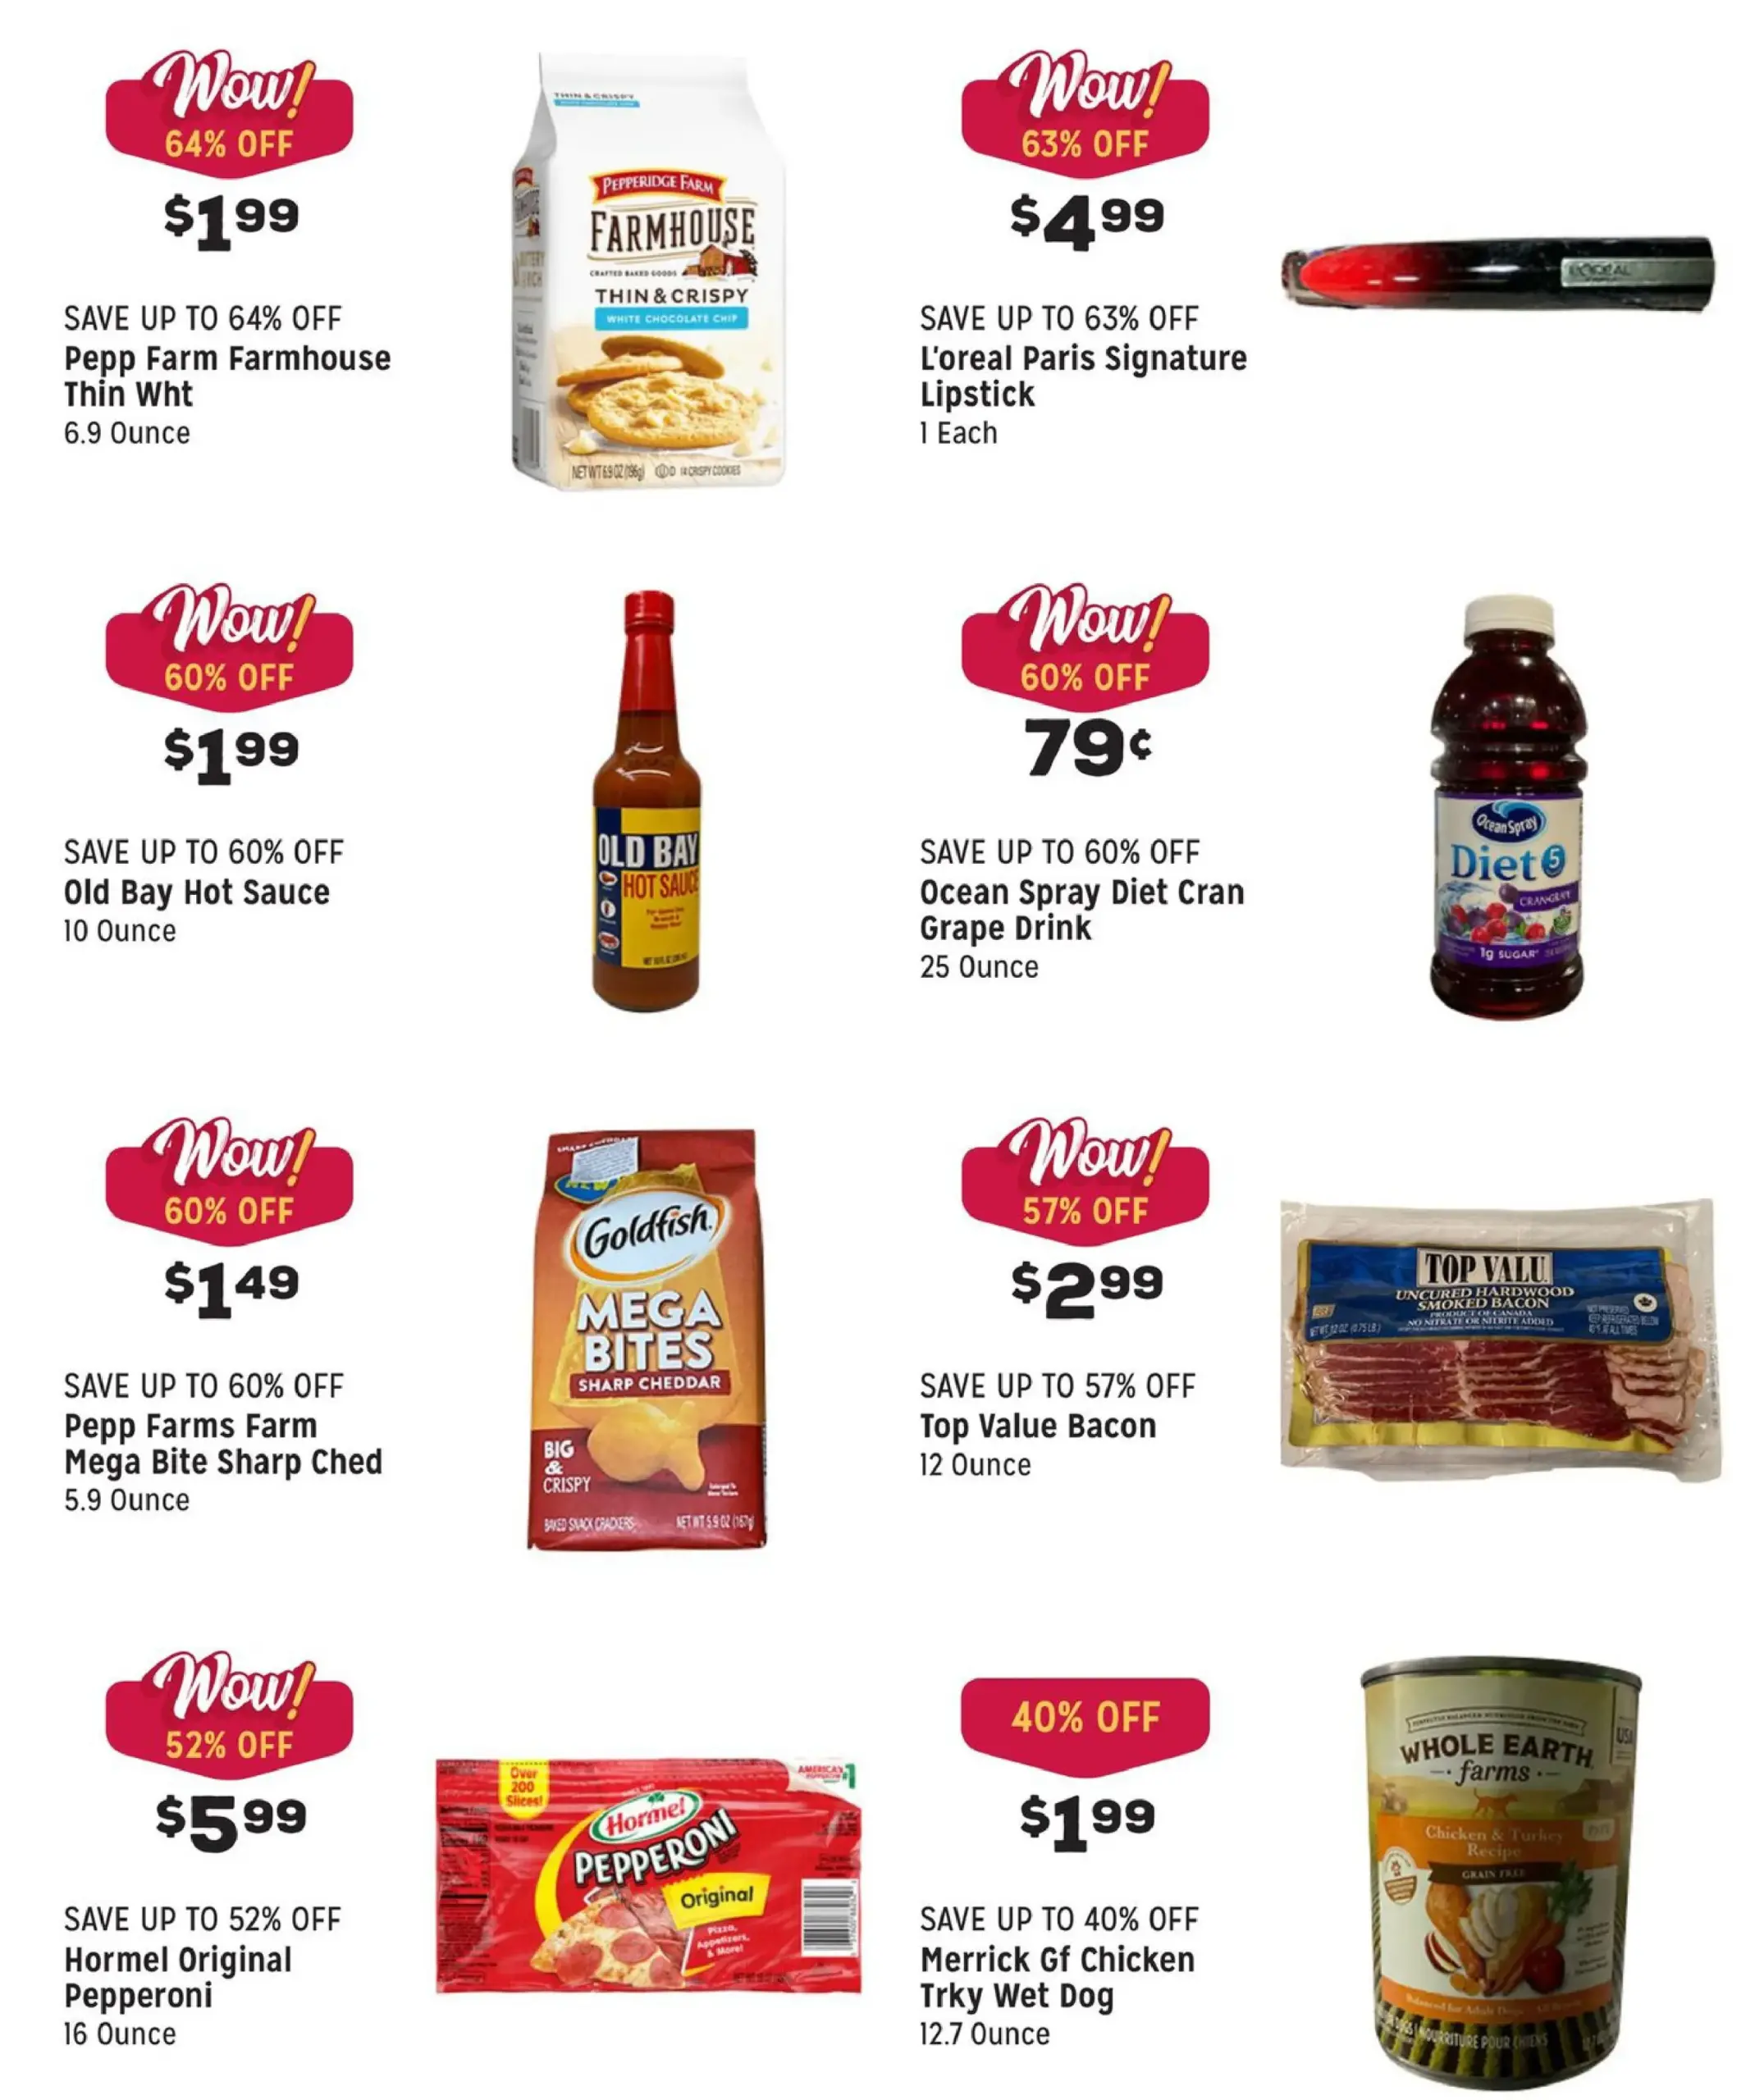 Grocery Outlet July 2024 Weekly Sales, Deals, Discounts and Digital Coupons.